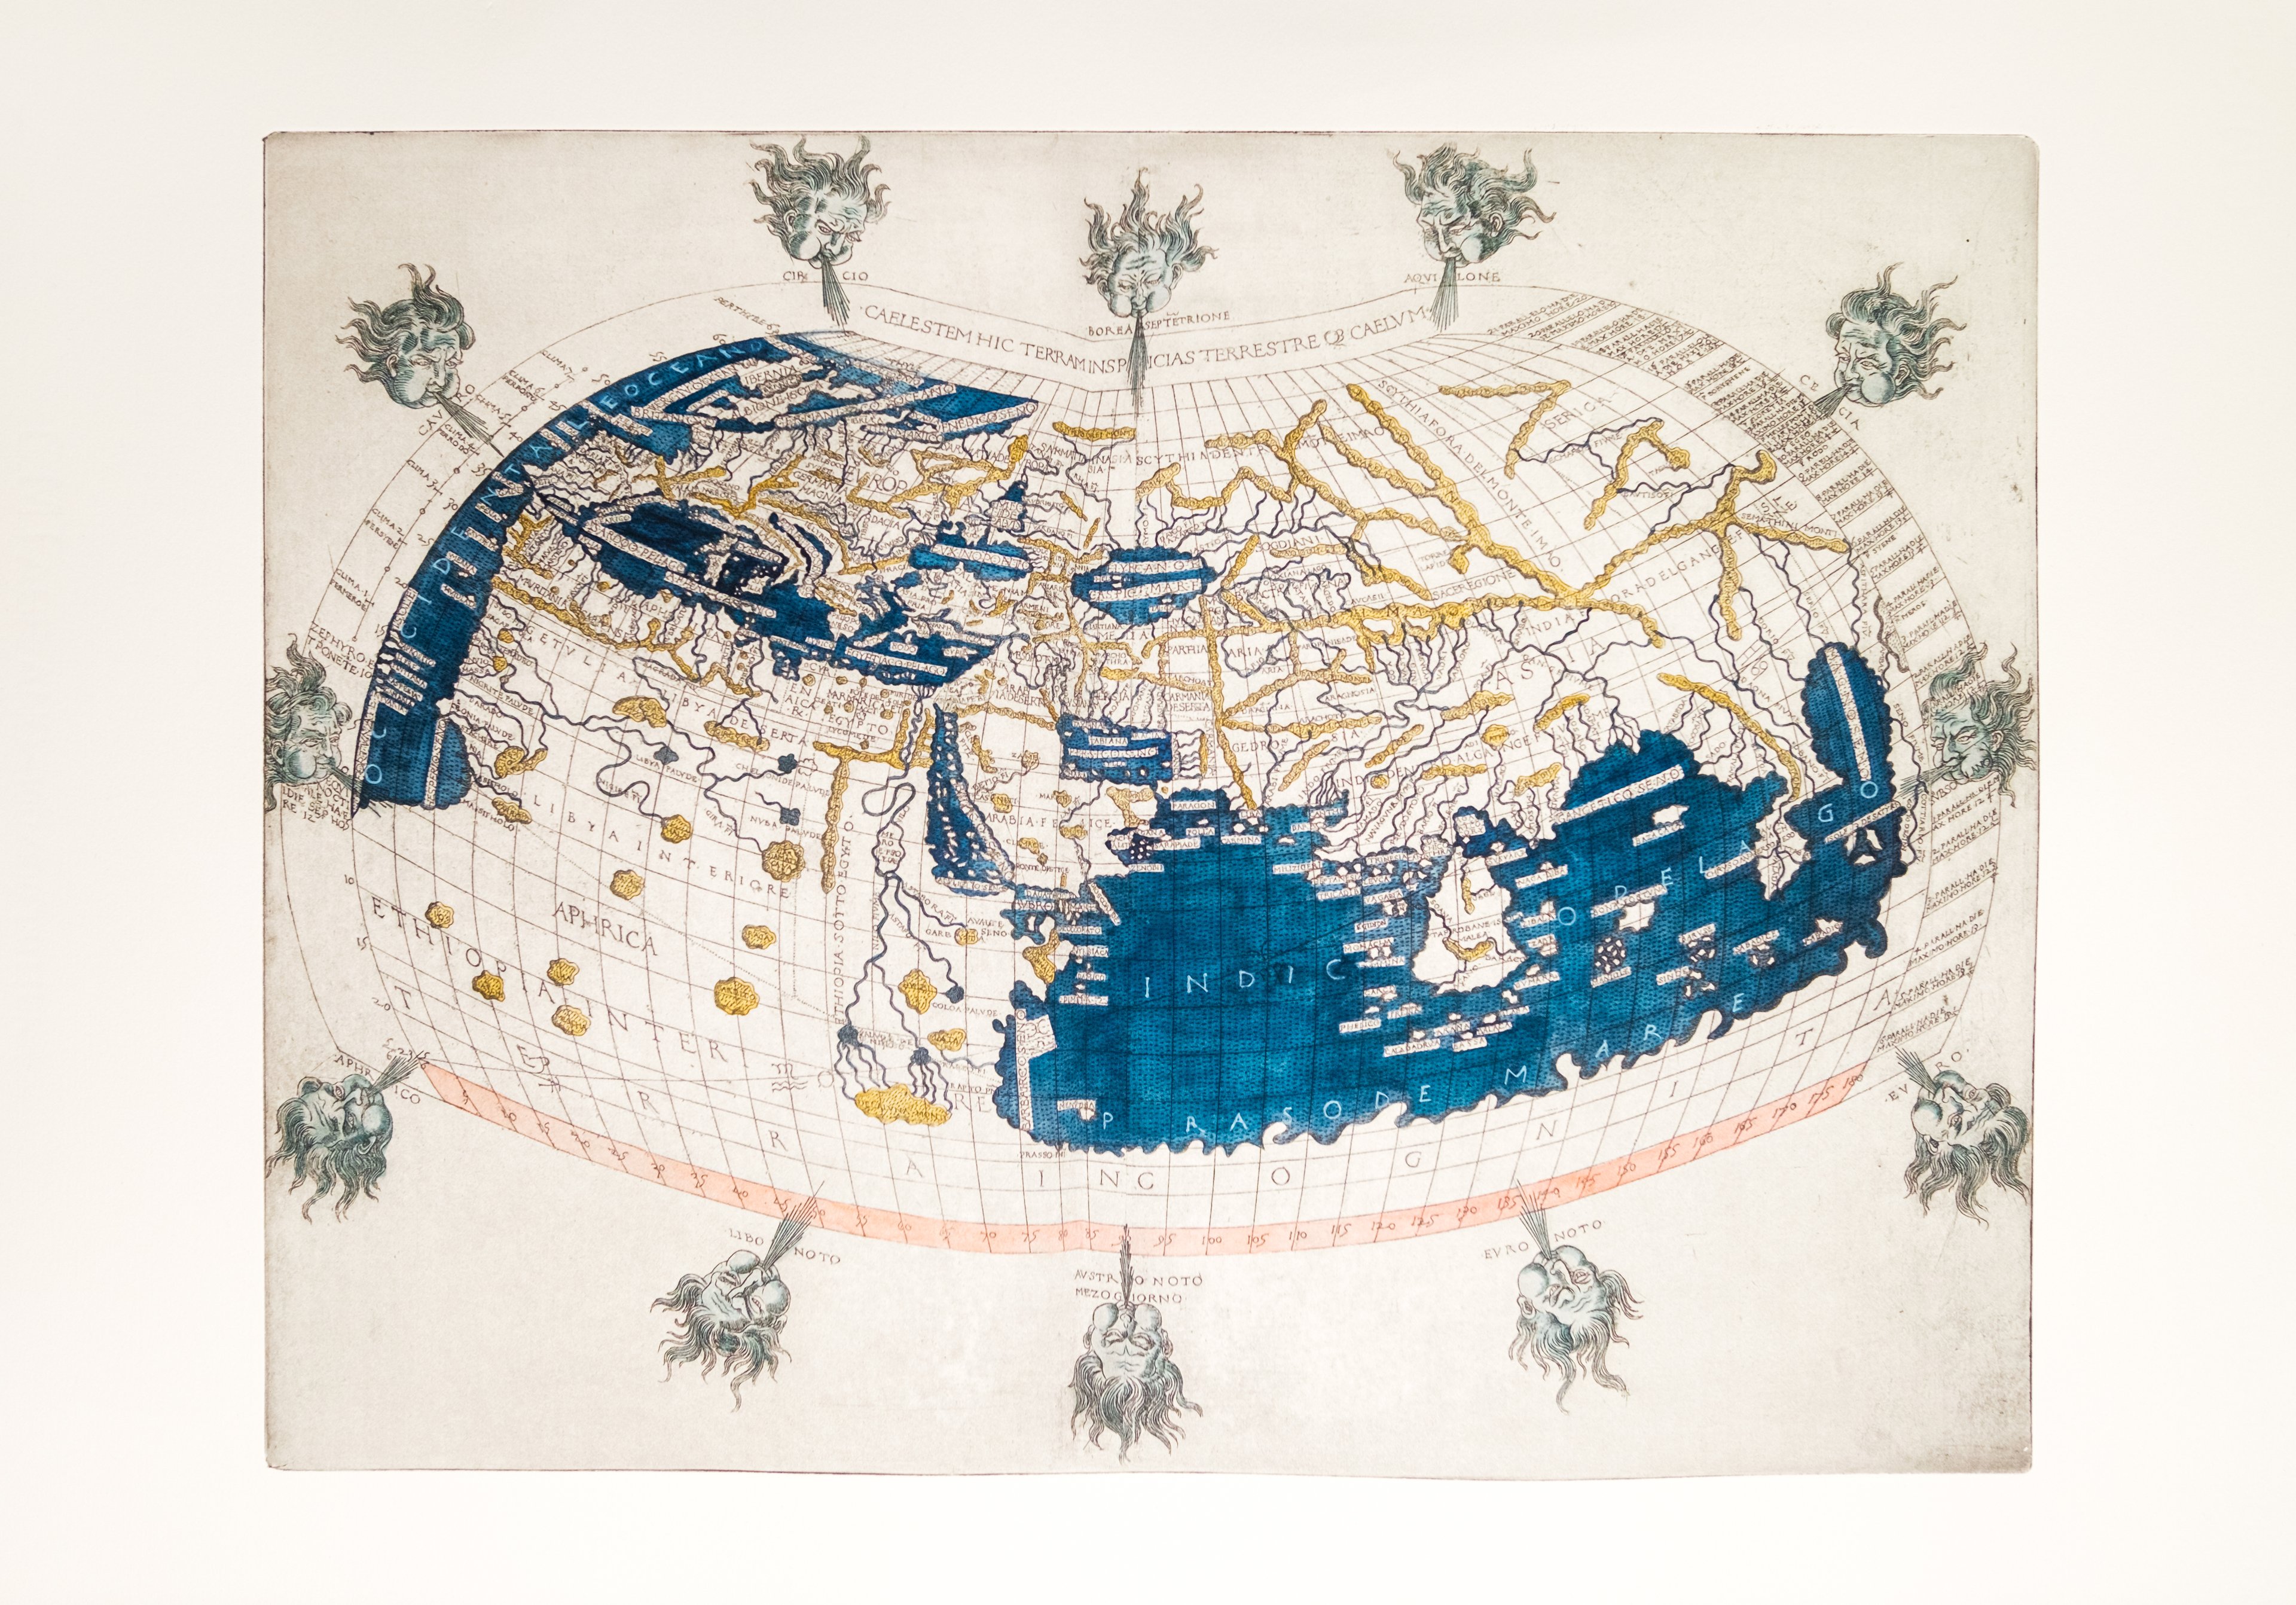 Berlinghieri World Map, hand-coloured, 50 x 70cm, edition of 20